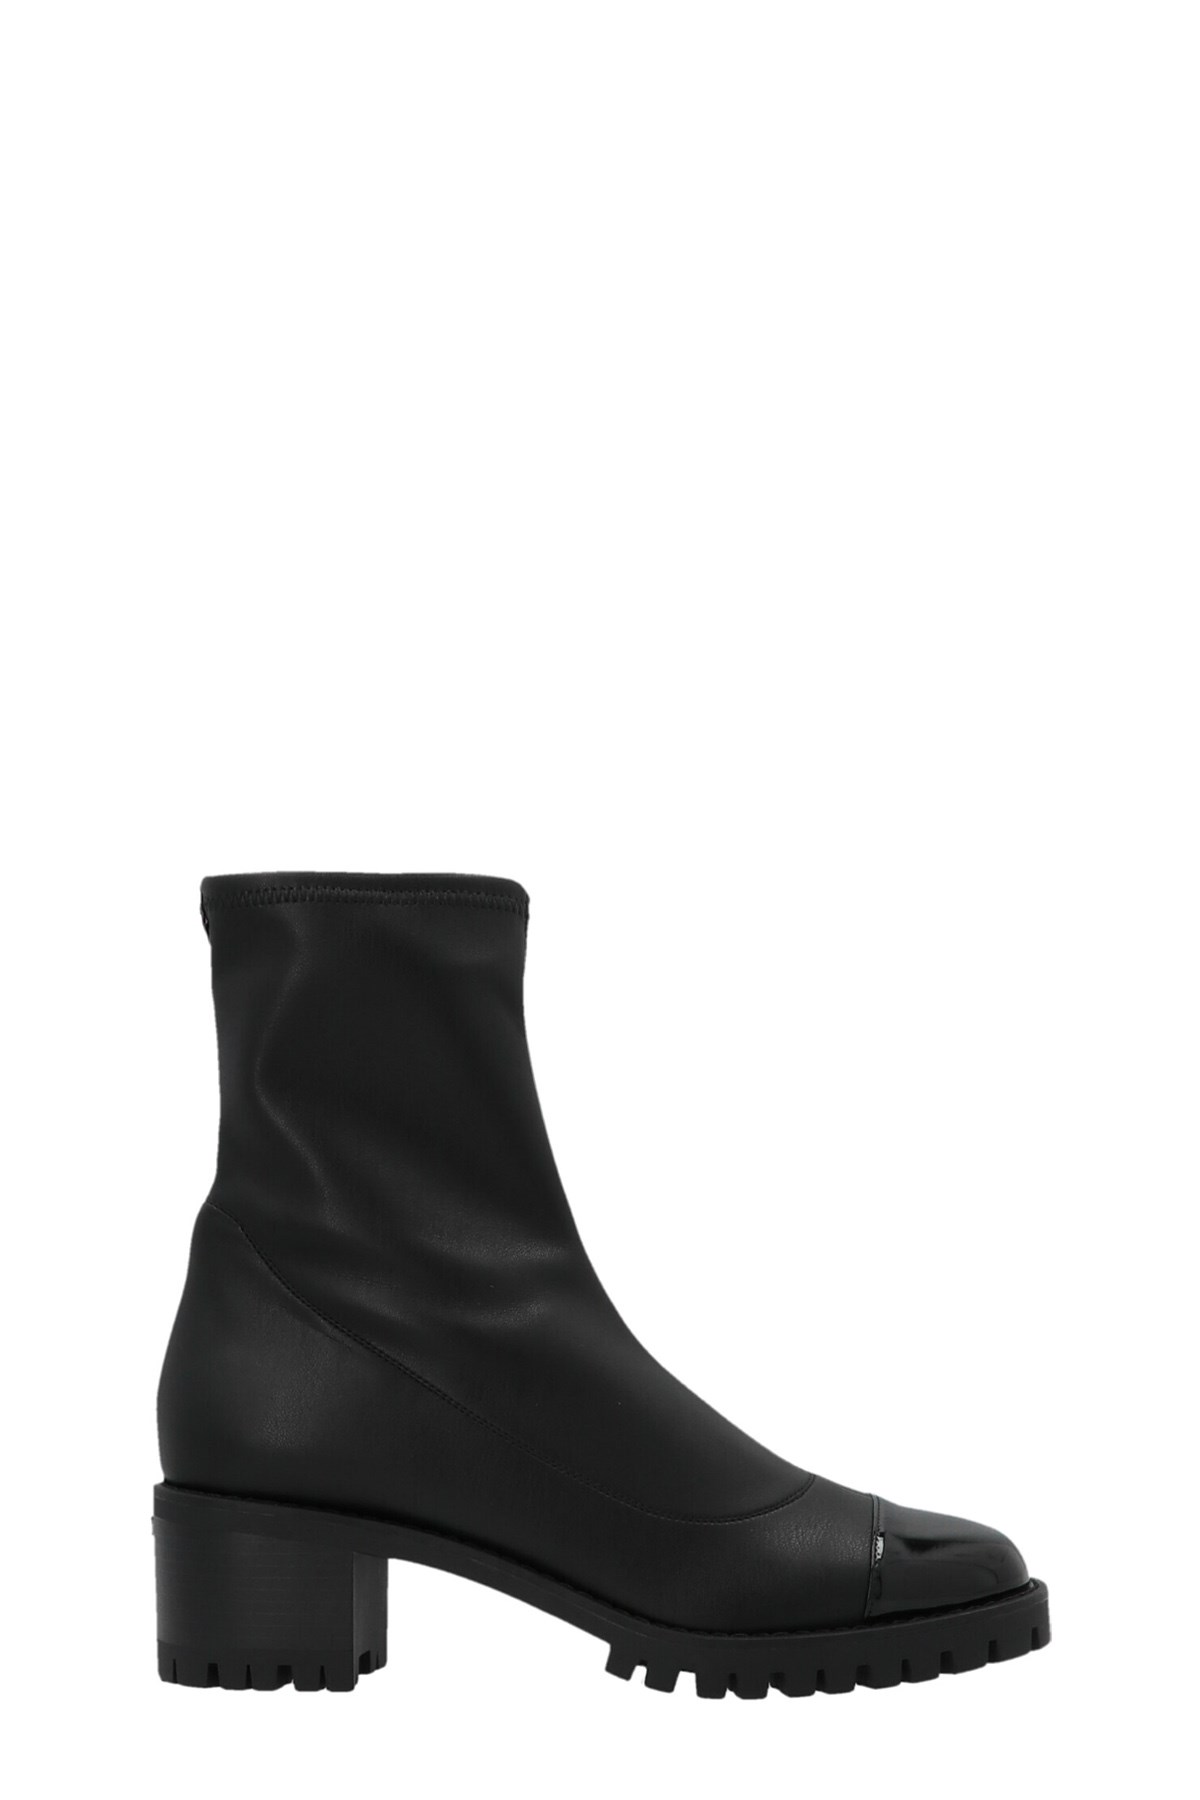 GIUSEPPE ZANOTTI 'Before’ Ankle Boots